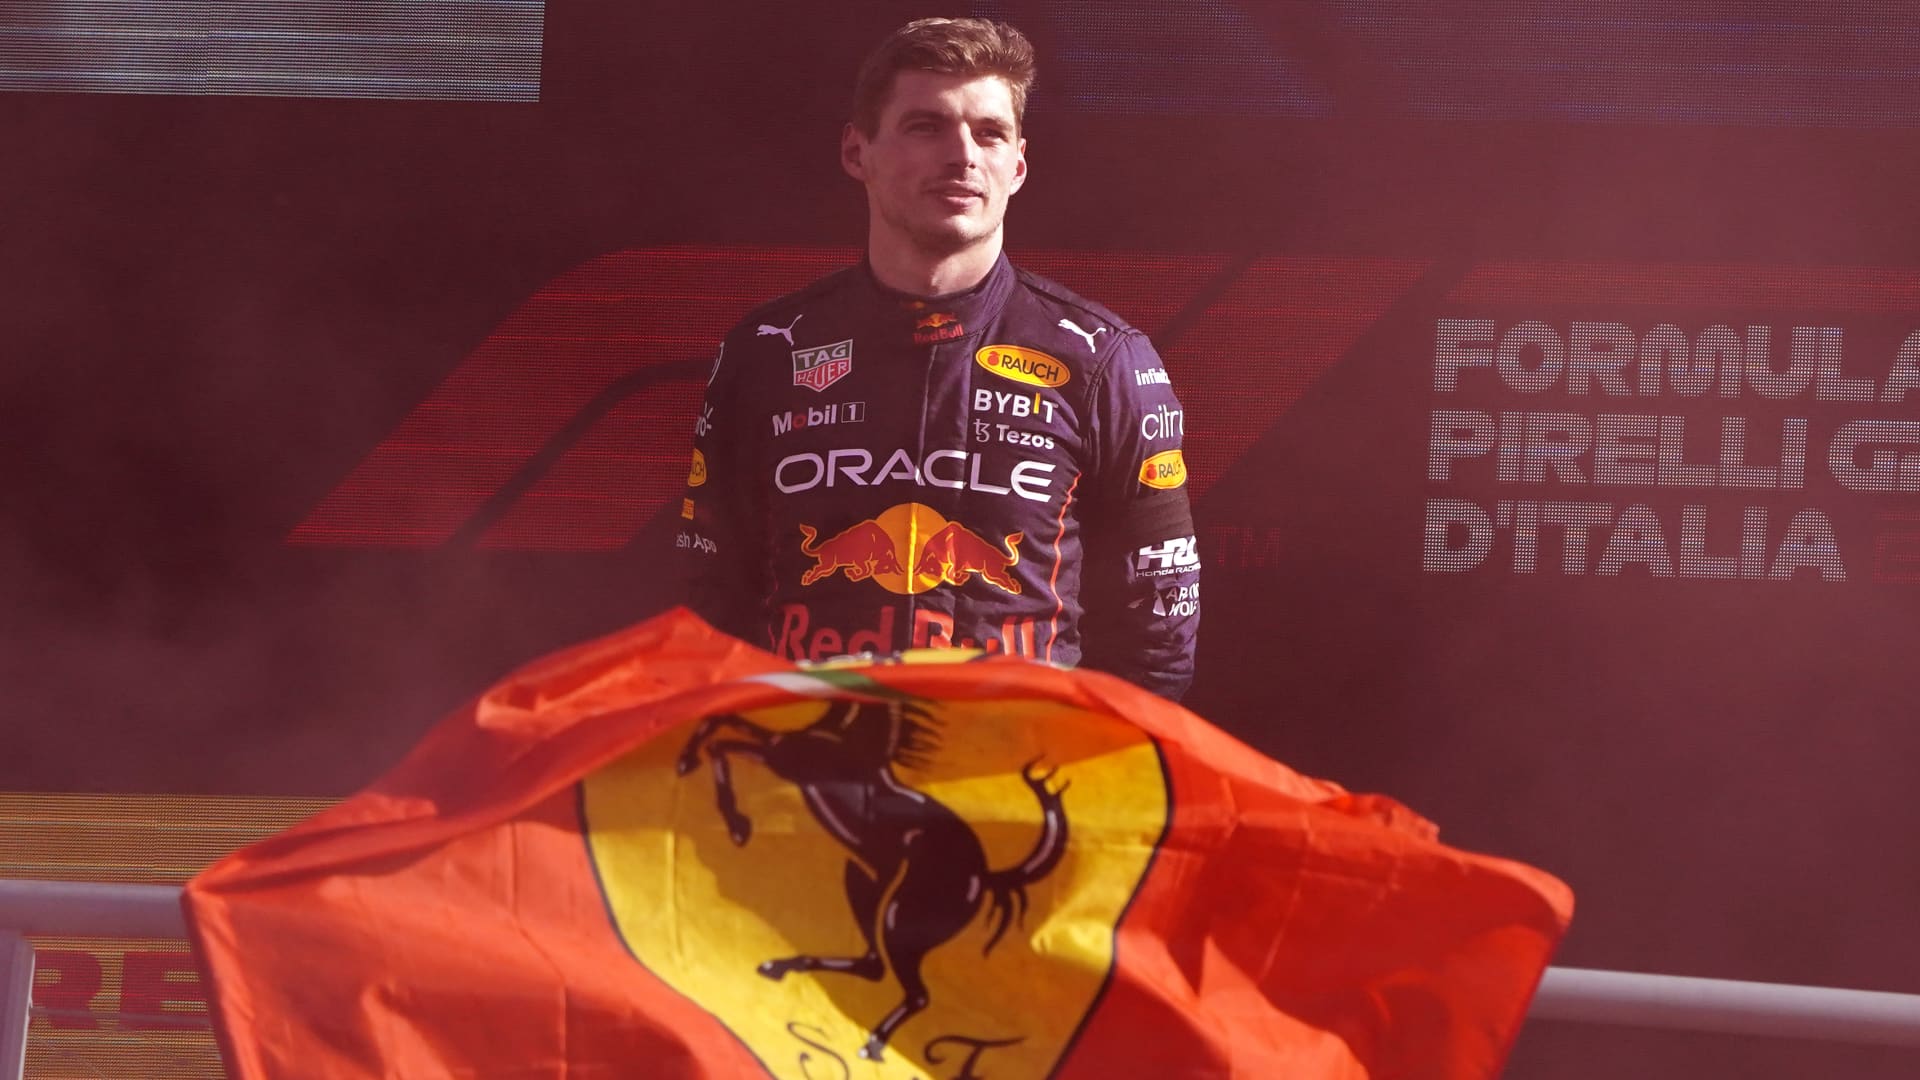 F1's Max Verstappen says the Singapore race is 'very tough' but he's thrilled about its return